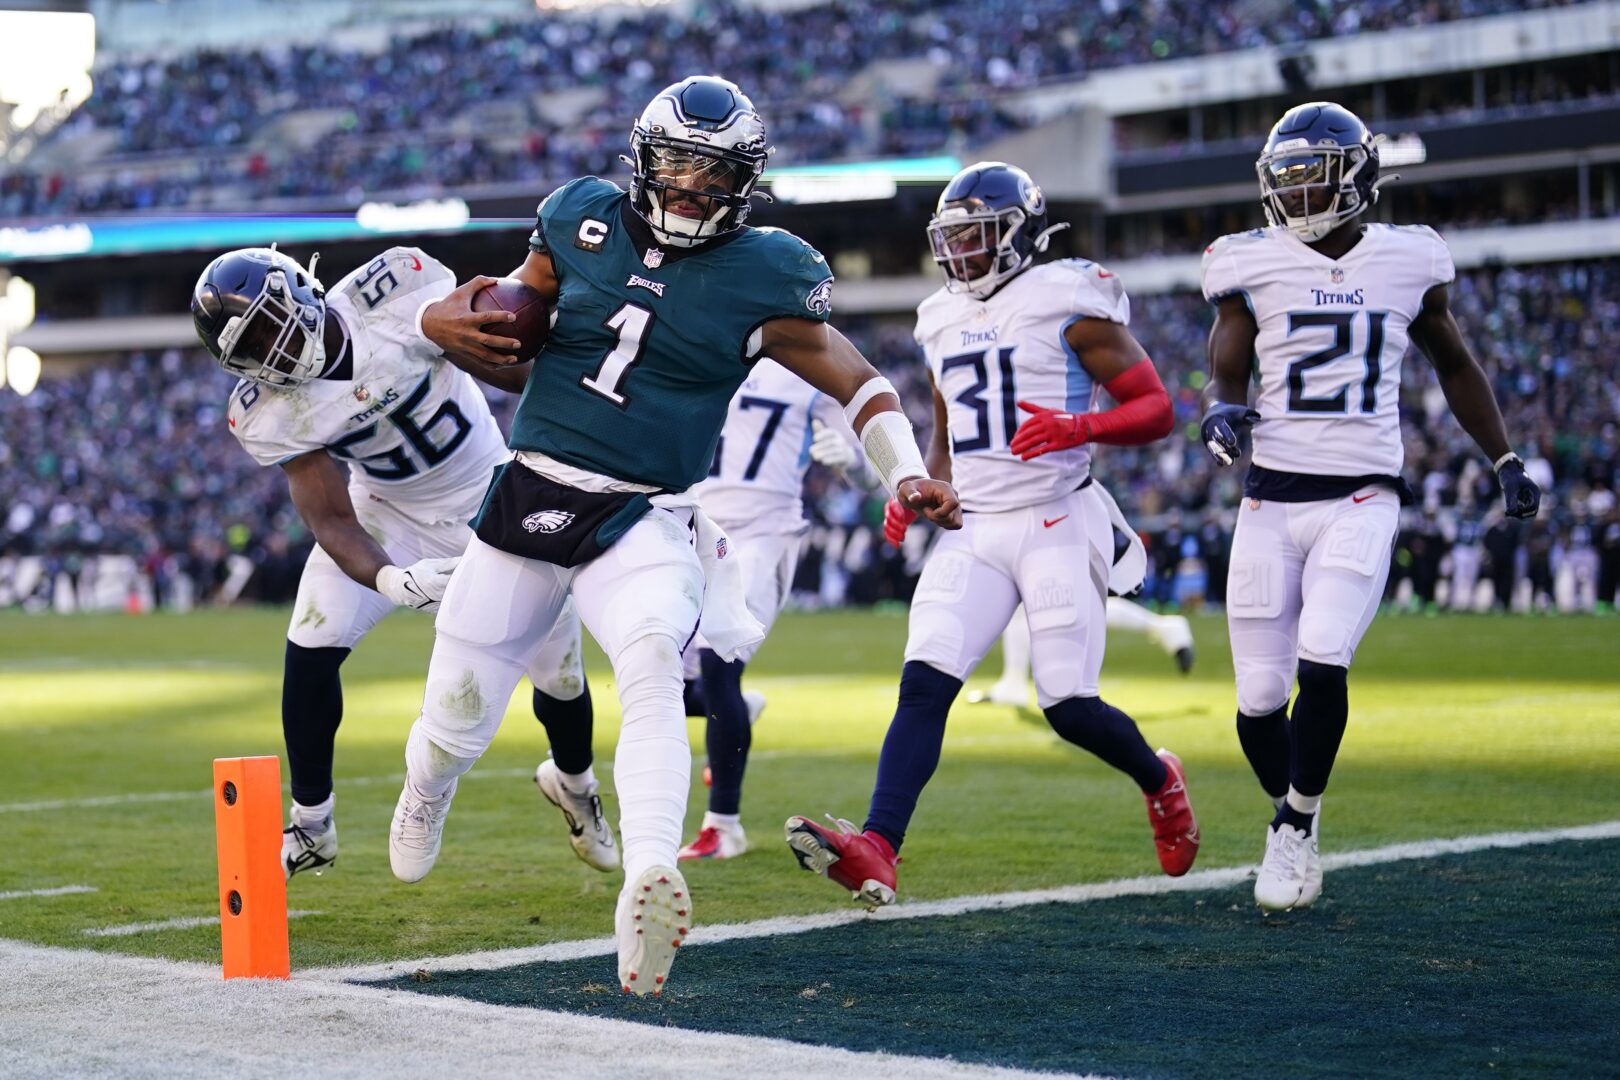 Philadelphia Eagles' Jalen Hurts scores a touchdown during the first half of an NFL football game against the Tennessee Titans, Sunday, Dec. 4, 2022, in Philadelphia.